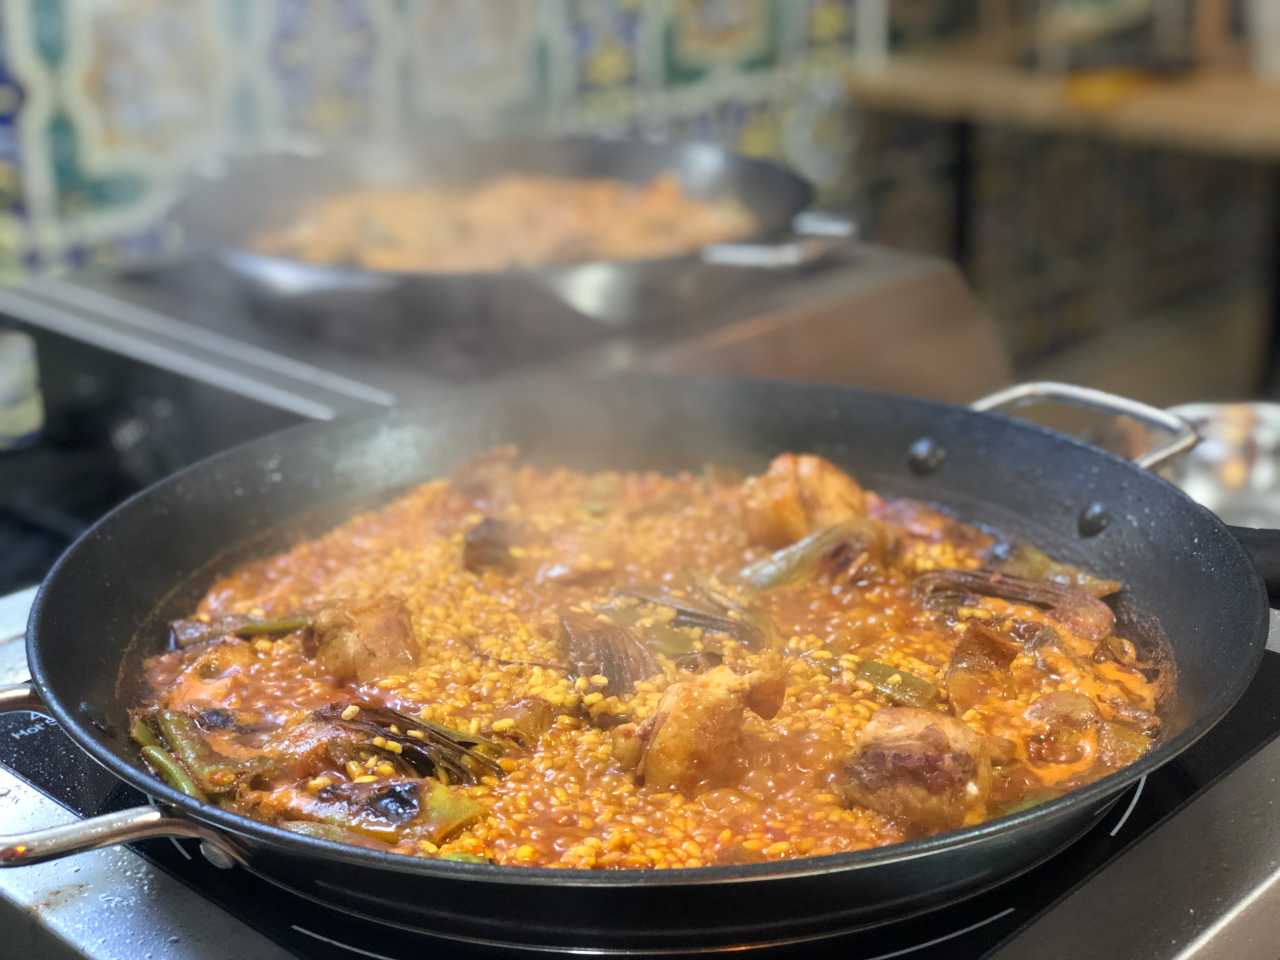 Llearn to Make an Authentic Paella